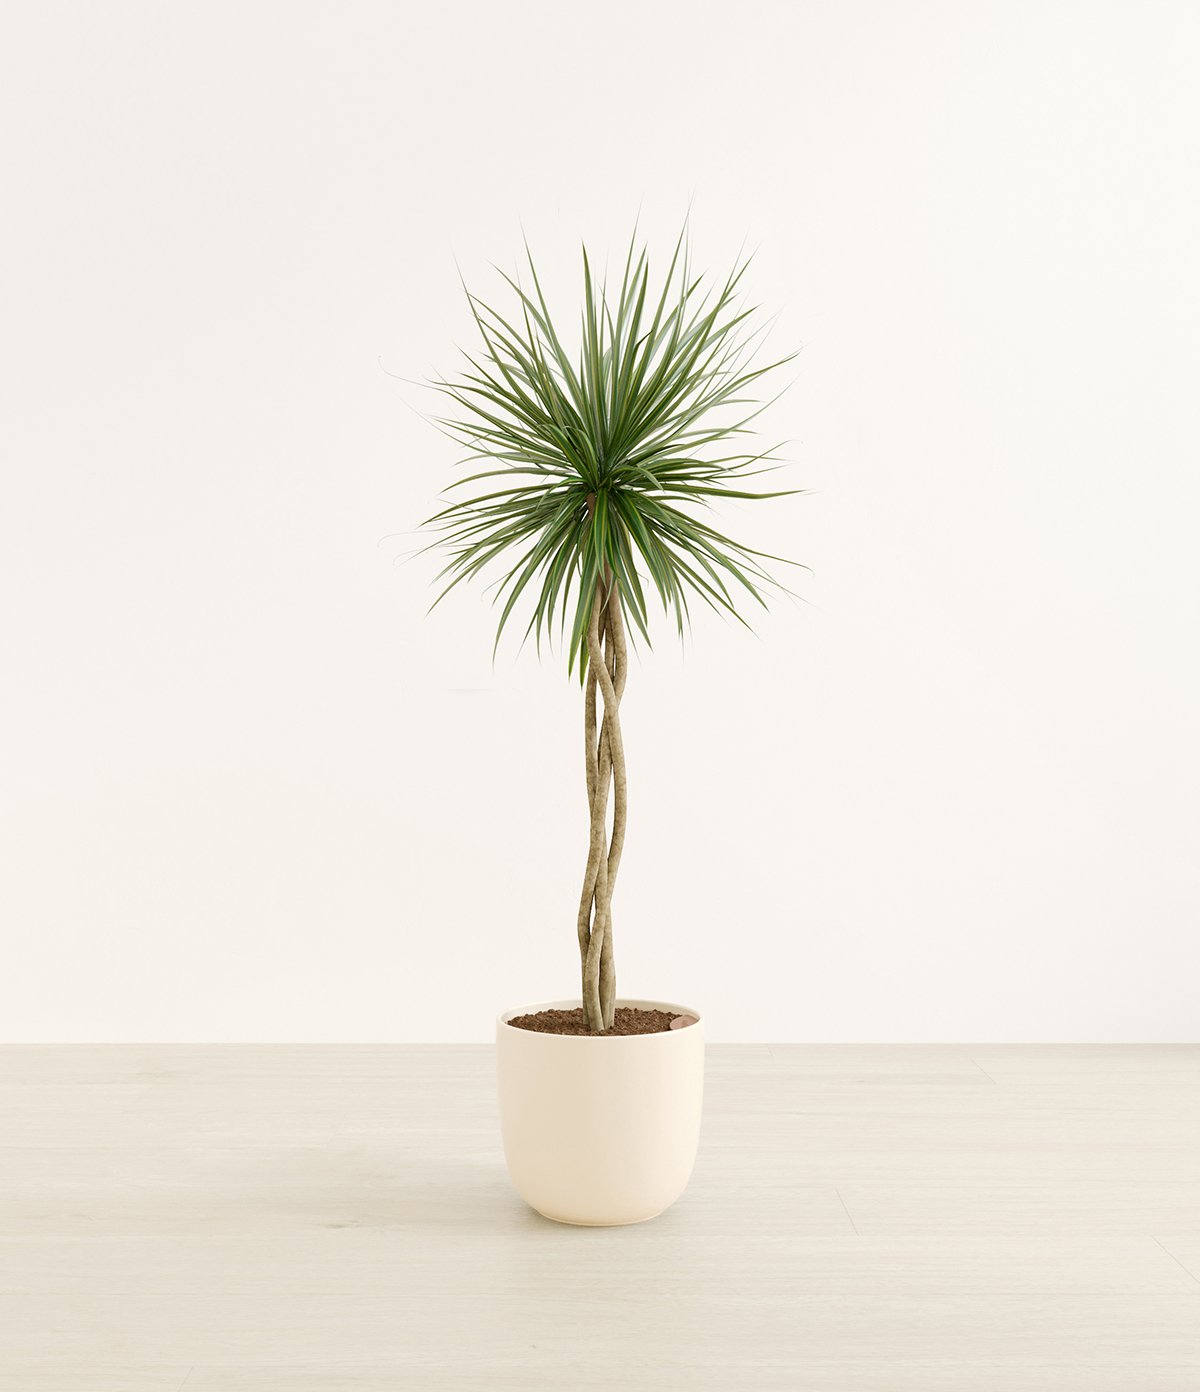 A Plant in a White Pot 3D Rendering